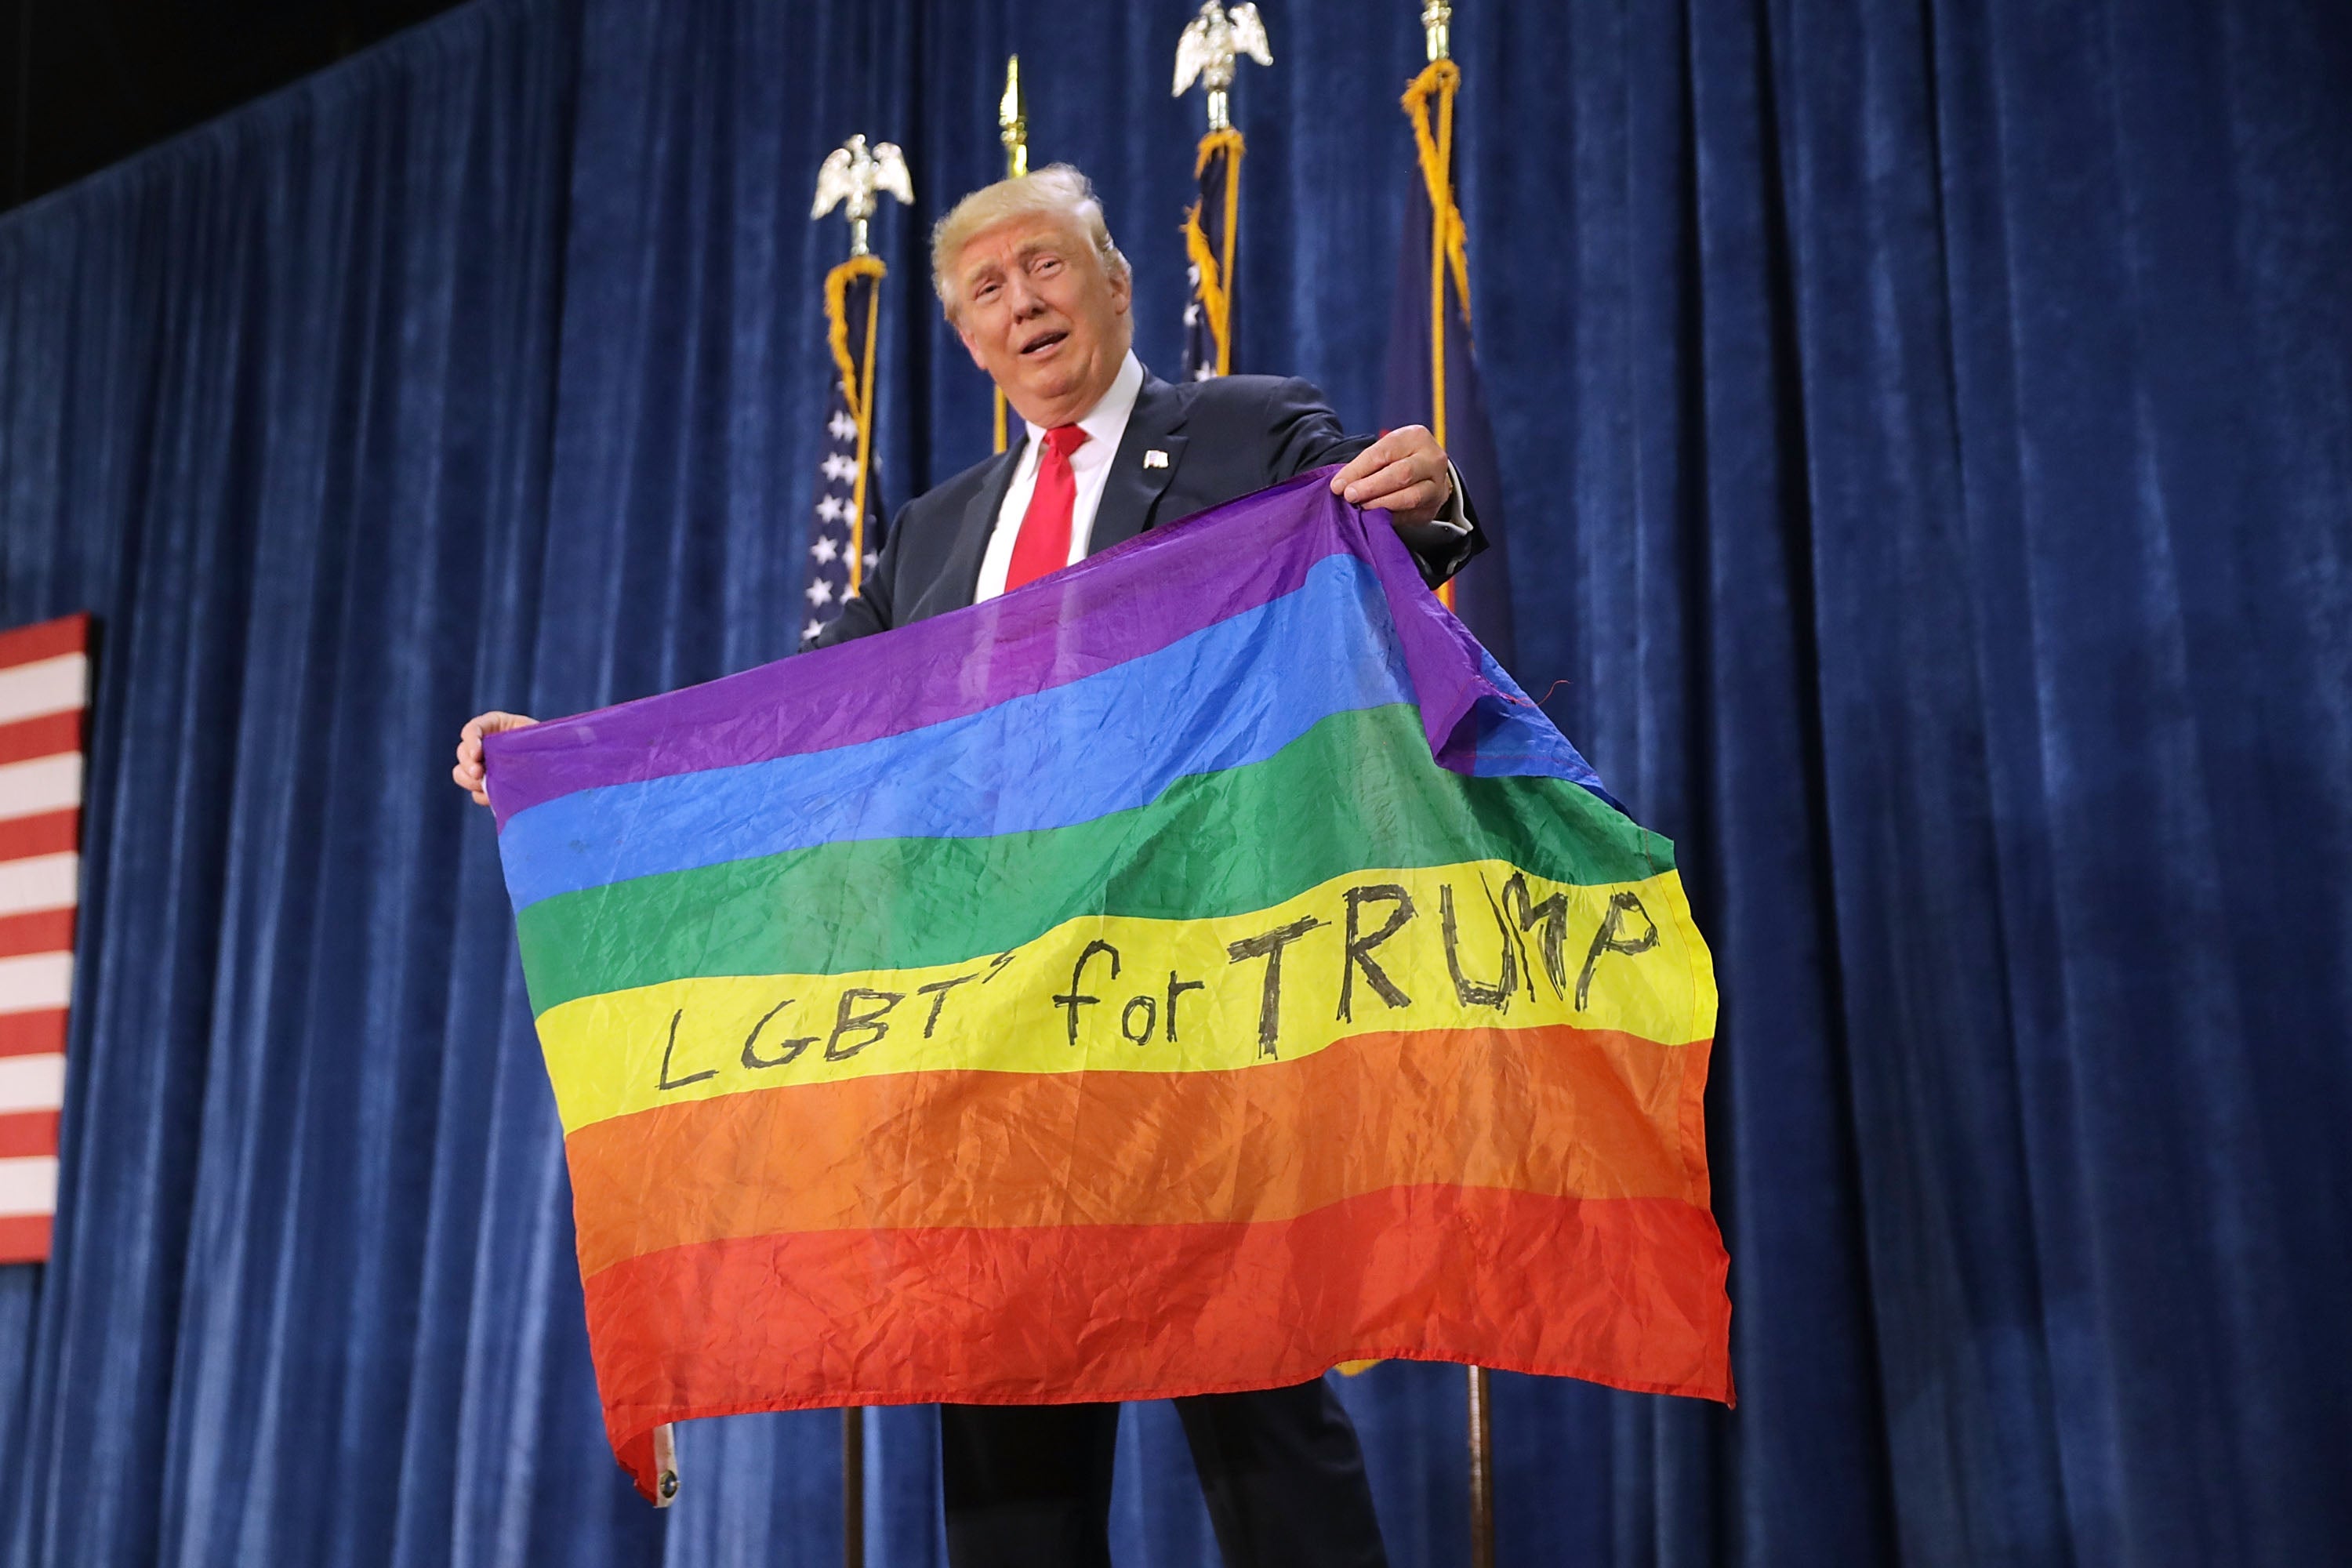 President Trump is hosting a “Trump Pride” event in Pennsylvania that mysteriously makes no mention of the LGBTQ community.